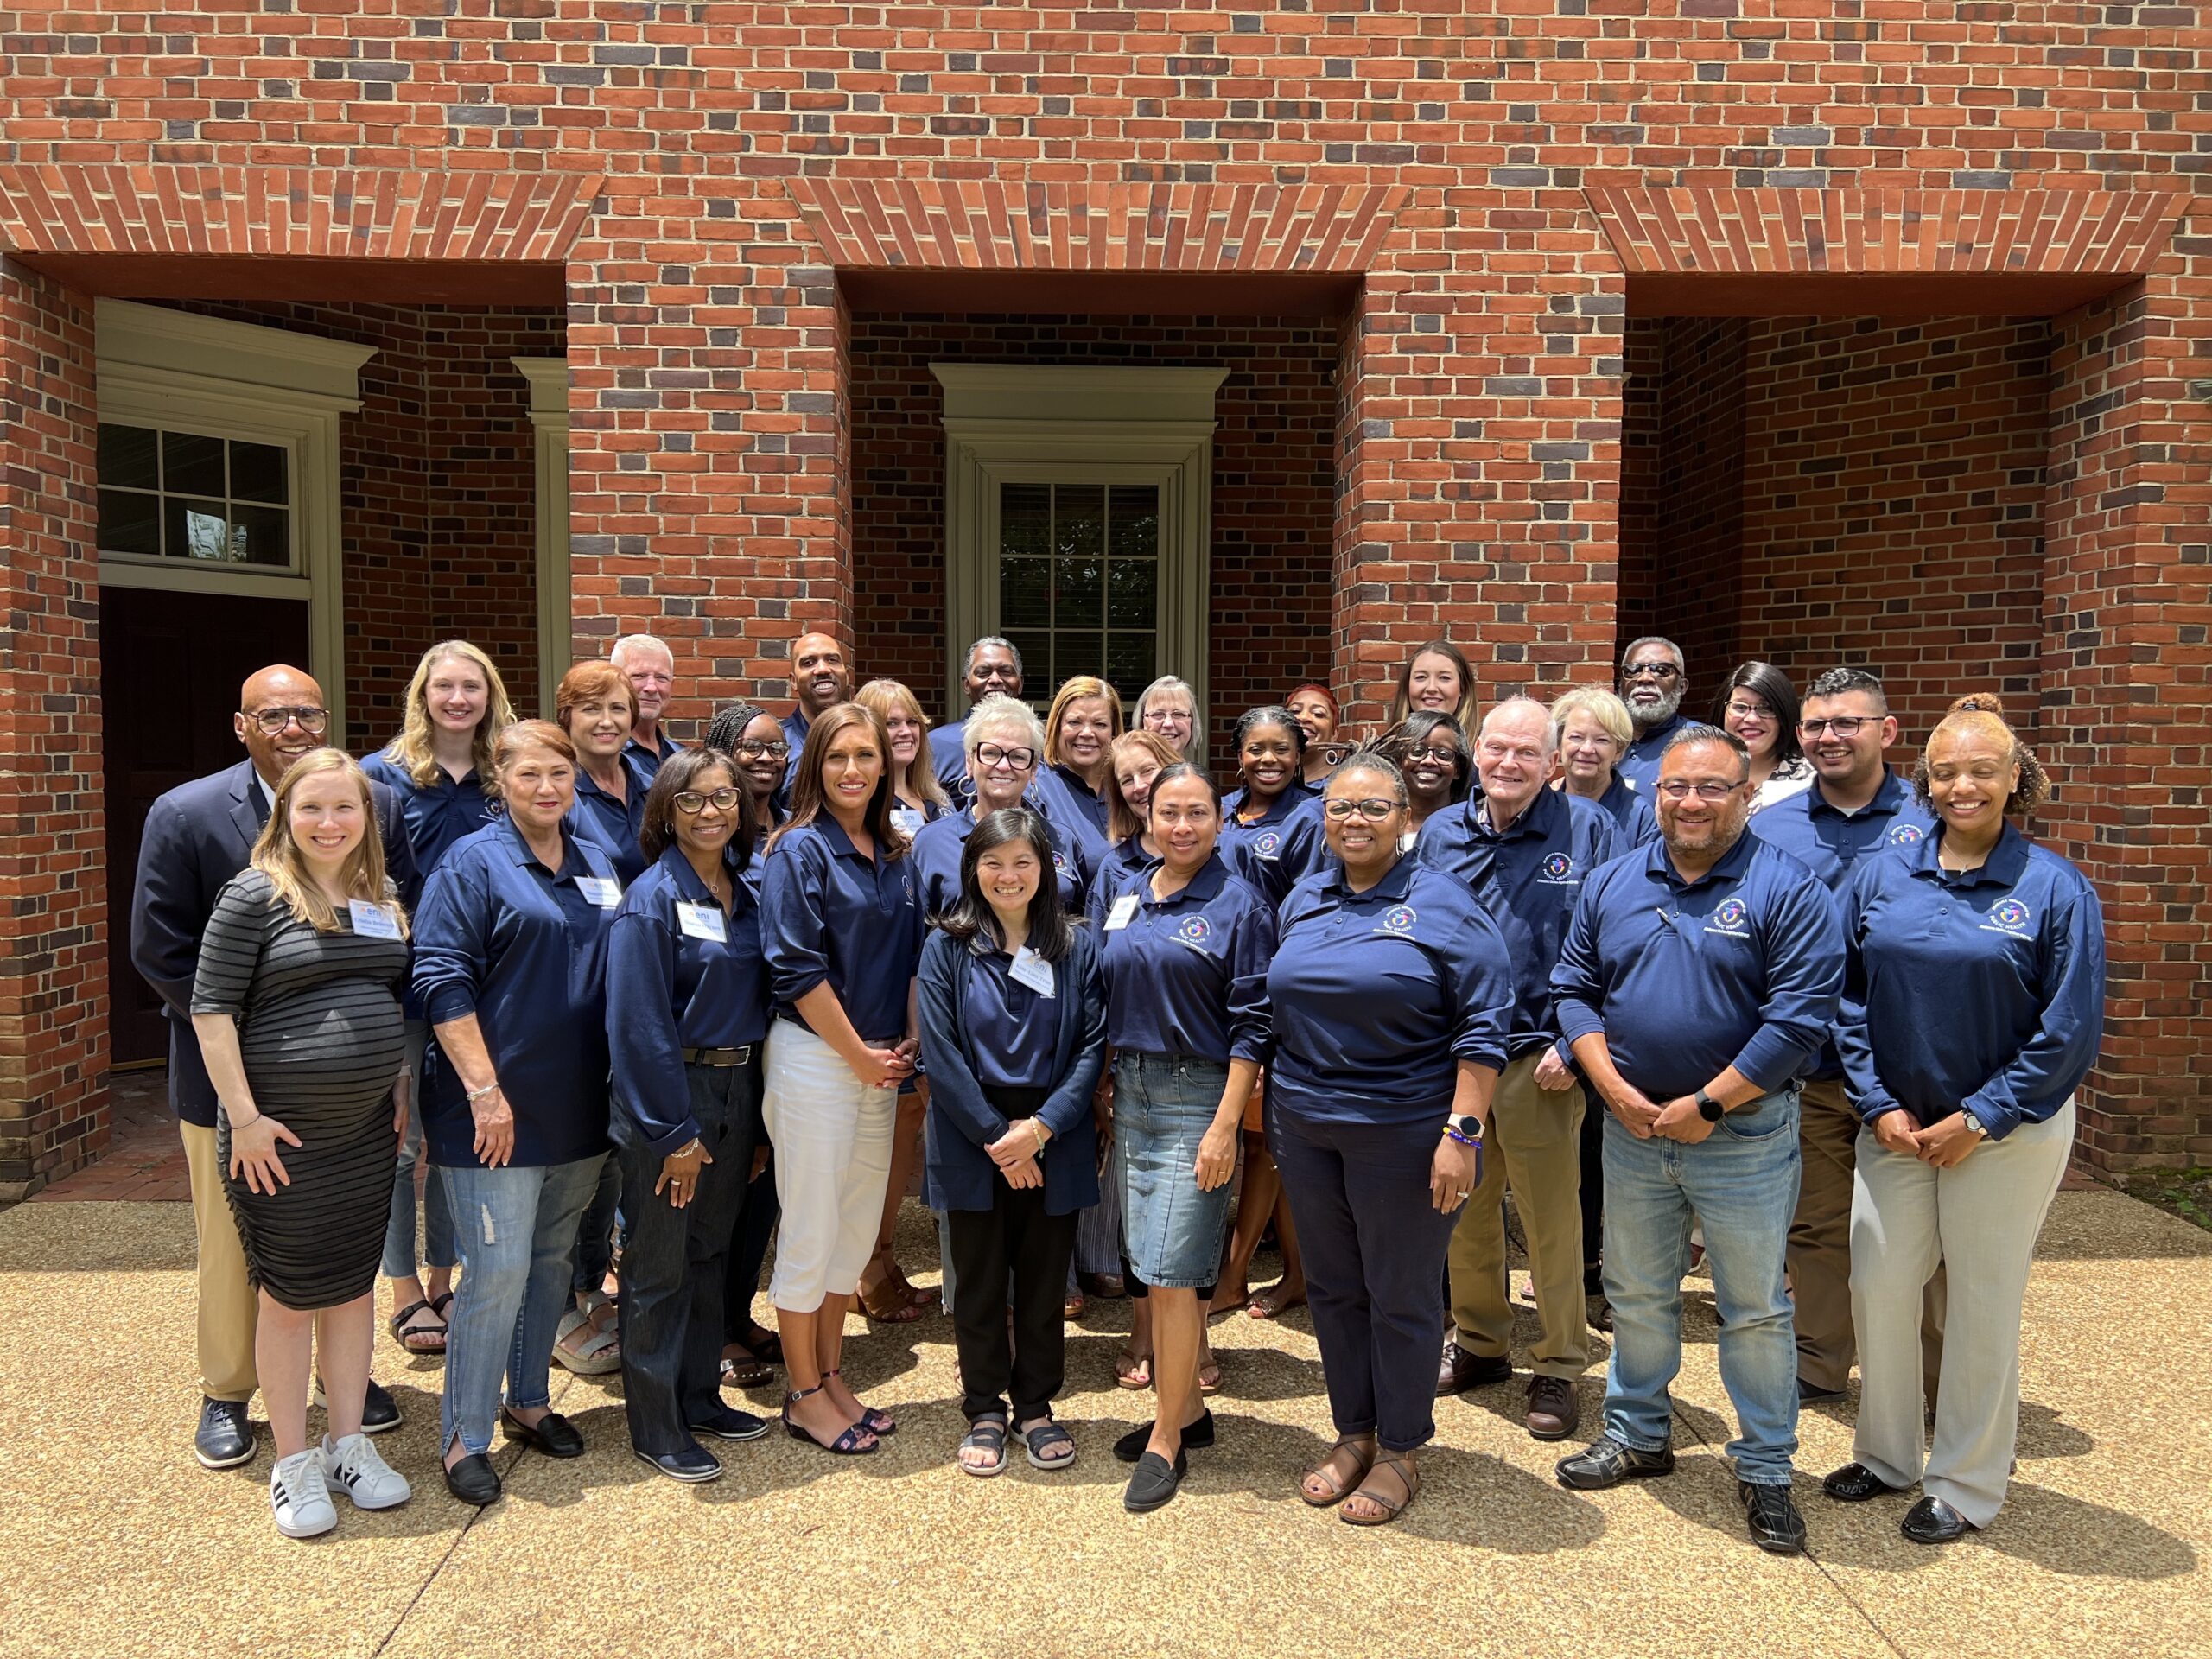 The ENI team poses at the June 2023 retreat. The team is wearing matching blue shirts from the Alabama Department of Public Health.